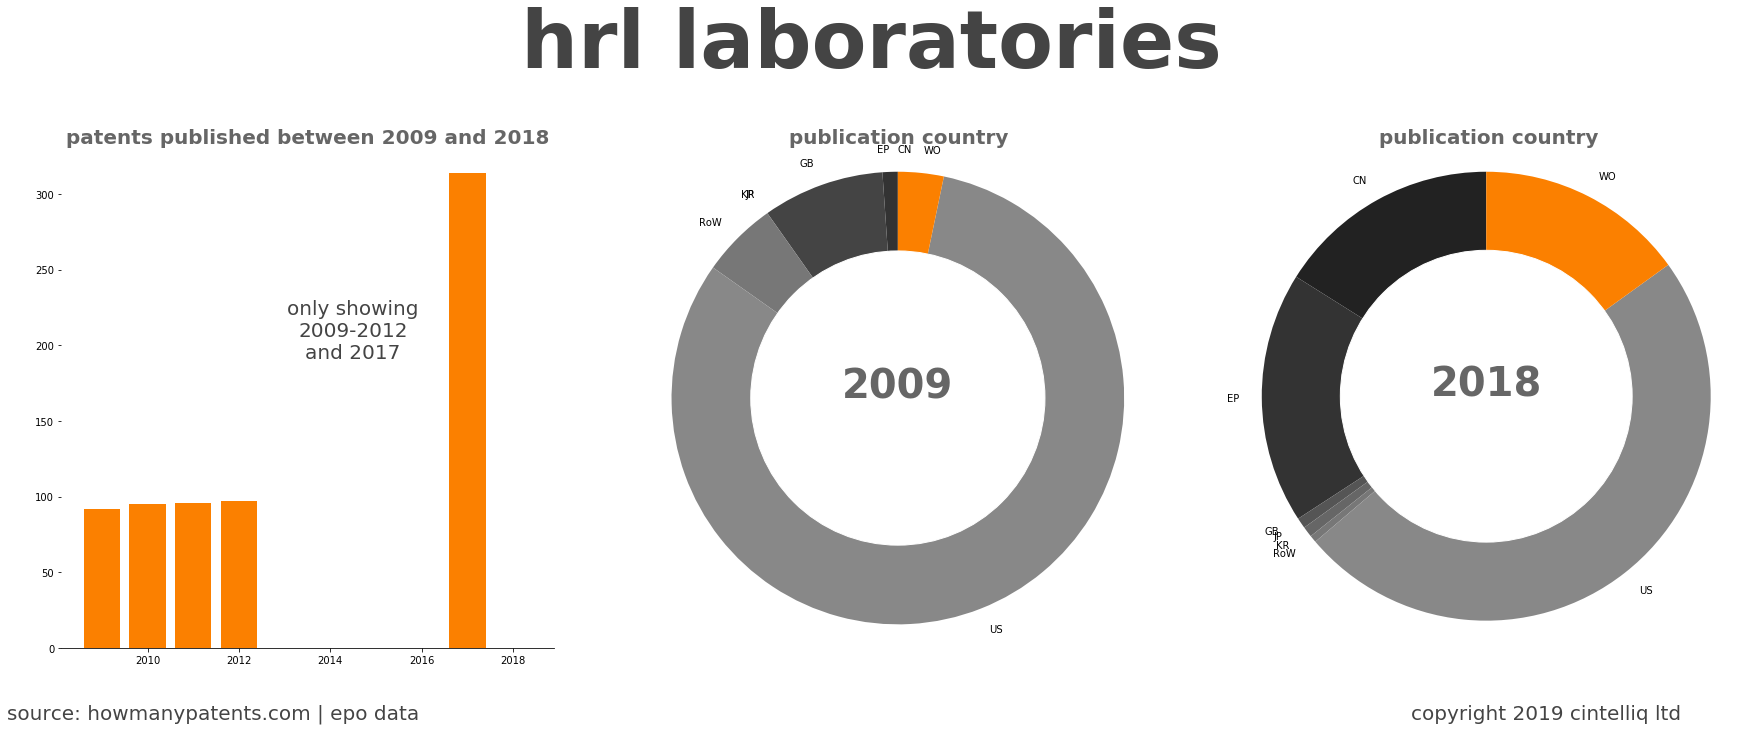 summary of patents for Hrl Laboratories